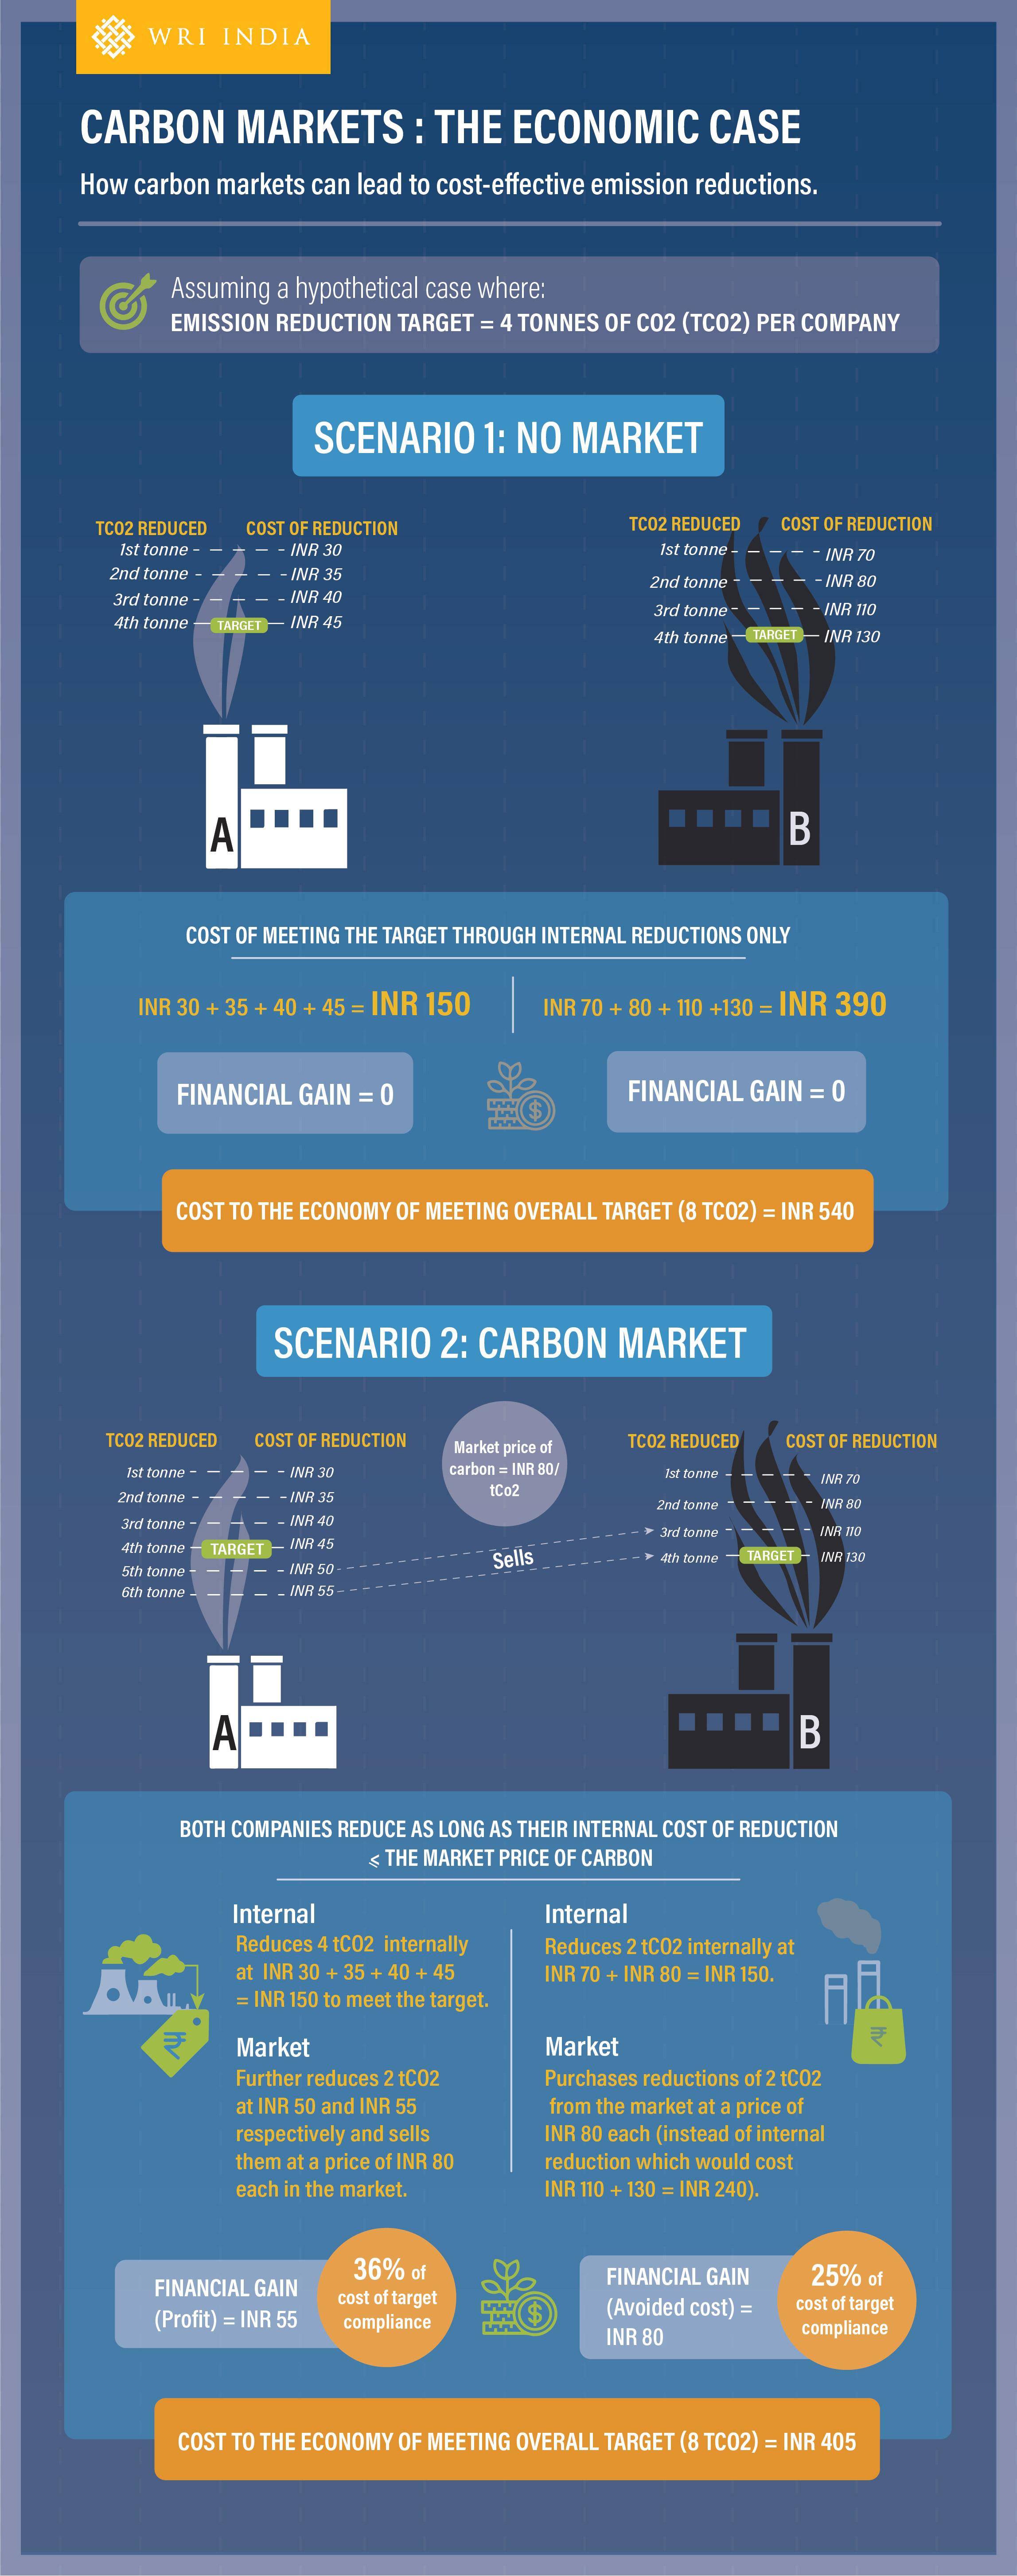 How trade in a carbon market reduces the total cost of achieving the emissions cap or target.